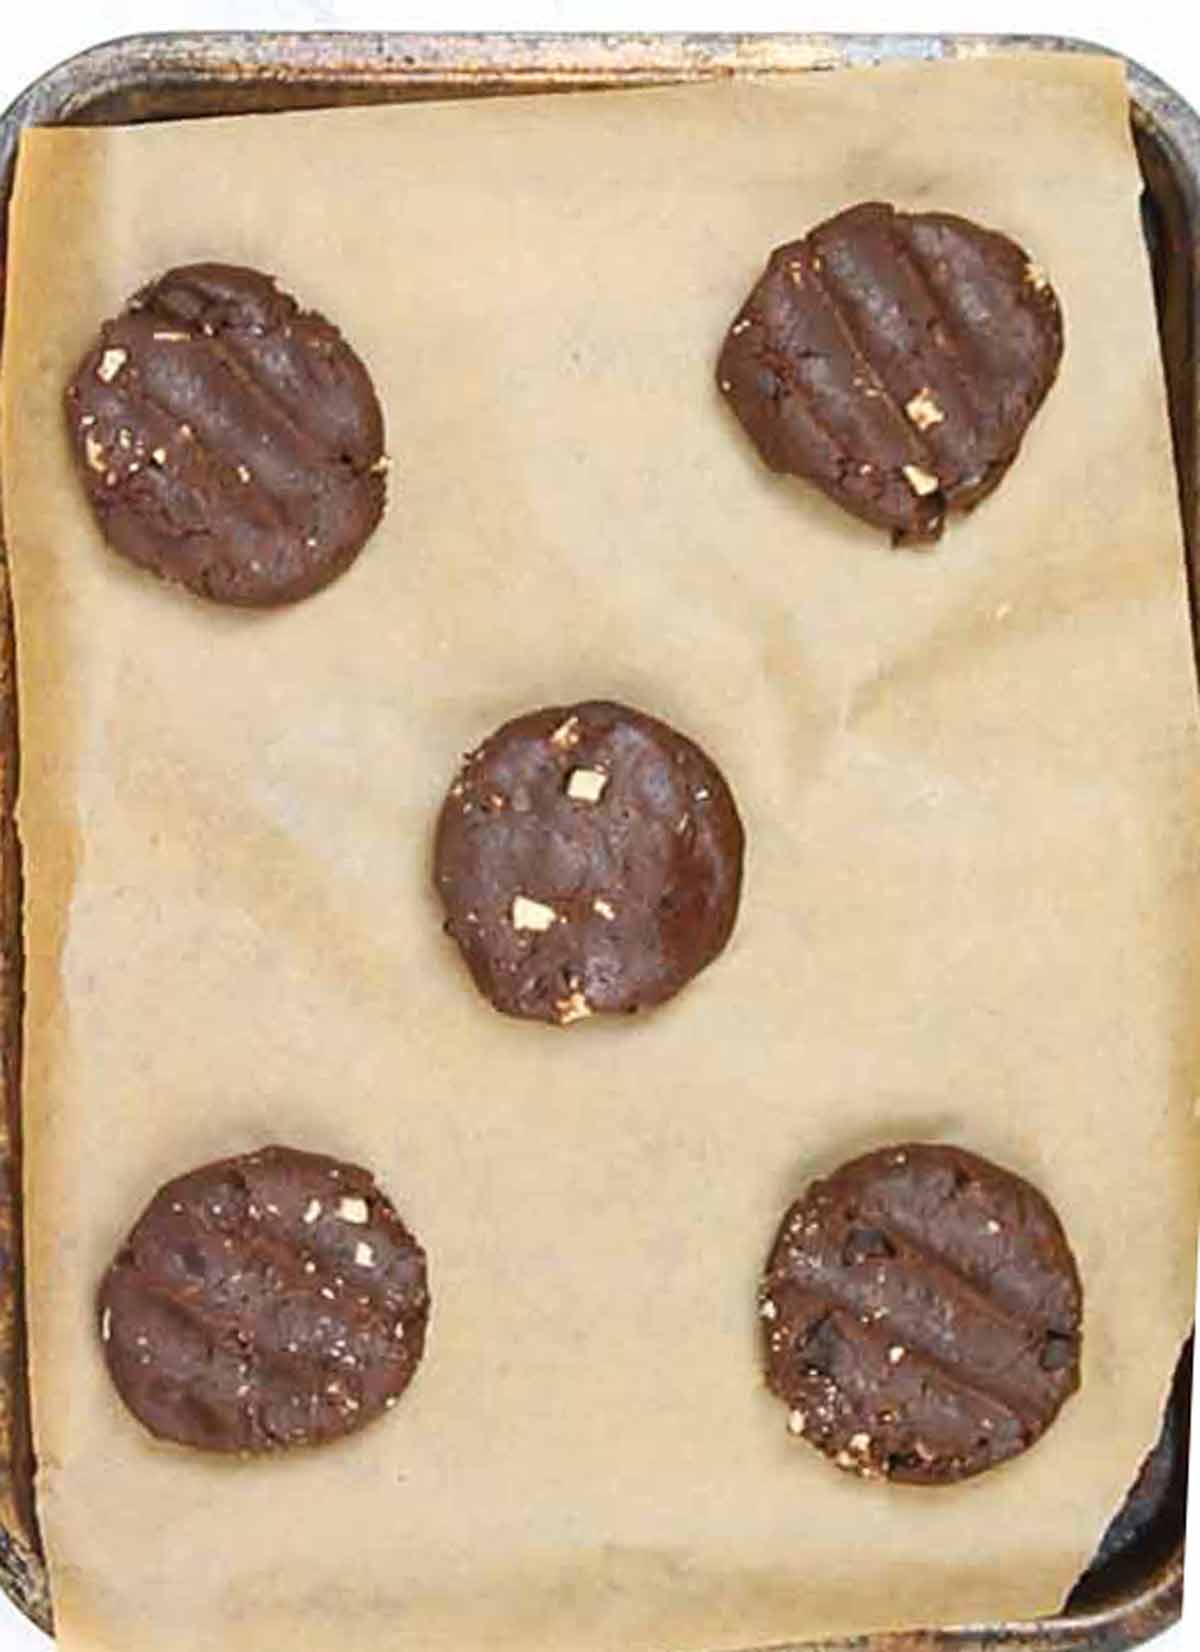 Cookies On Tray Before Baking